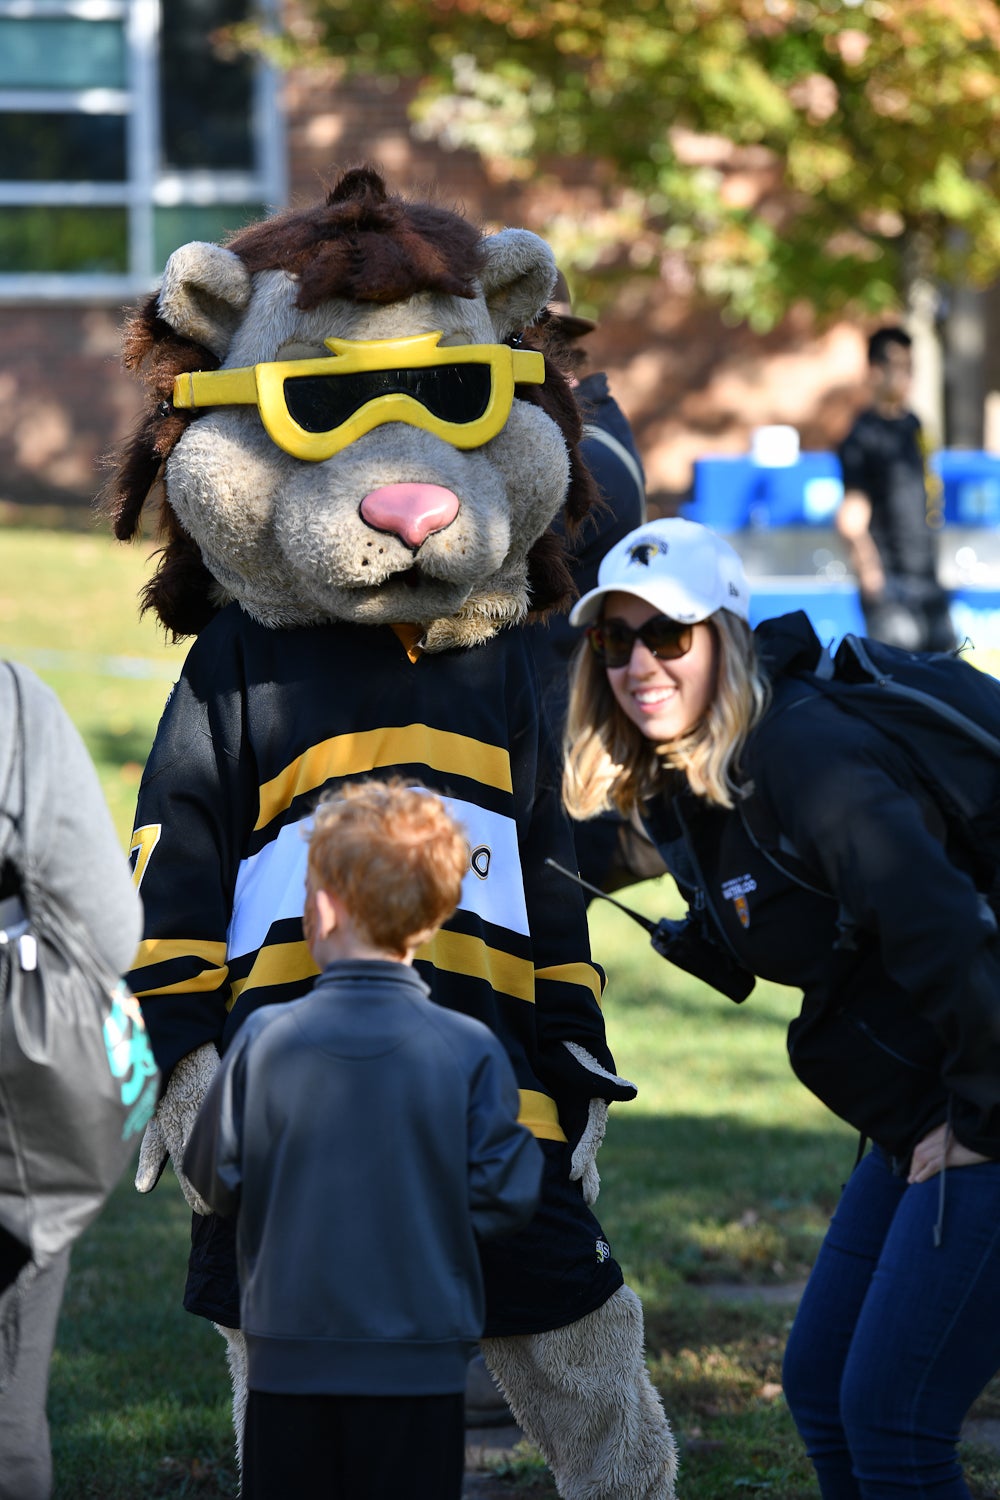 King Warrior, University of Waterloo mascot taking a photo with a child